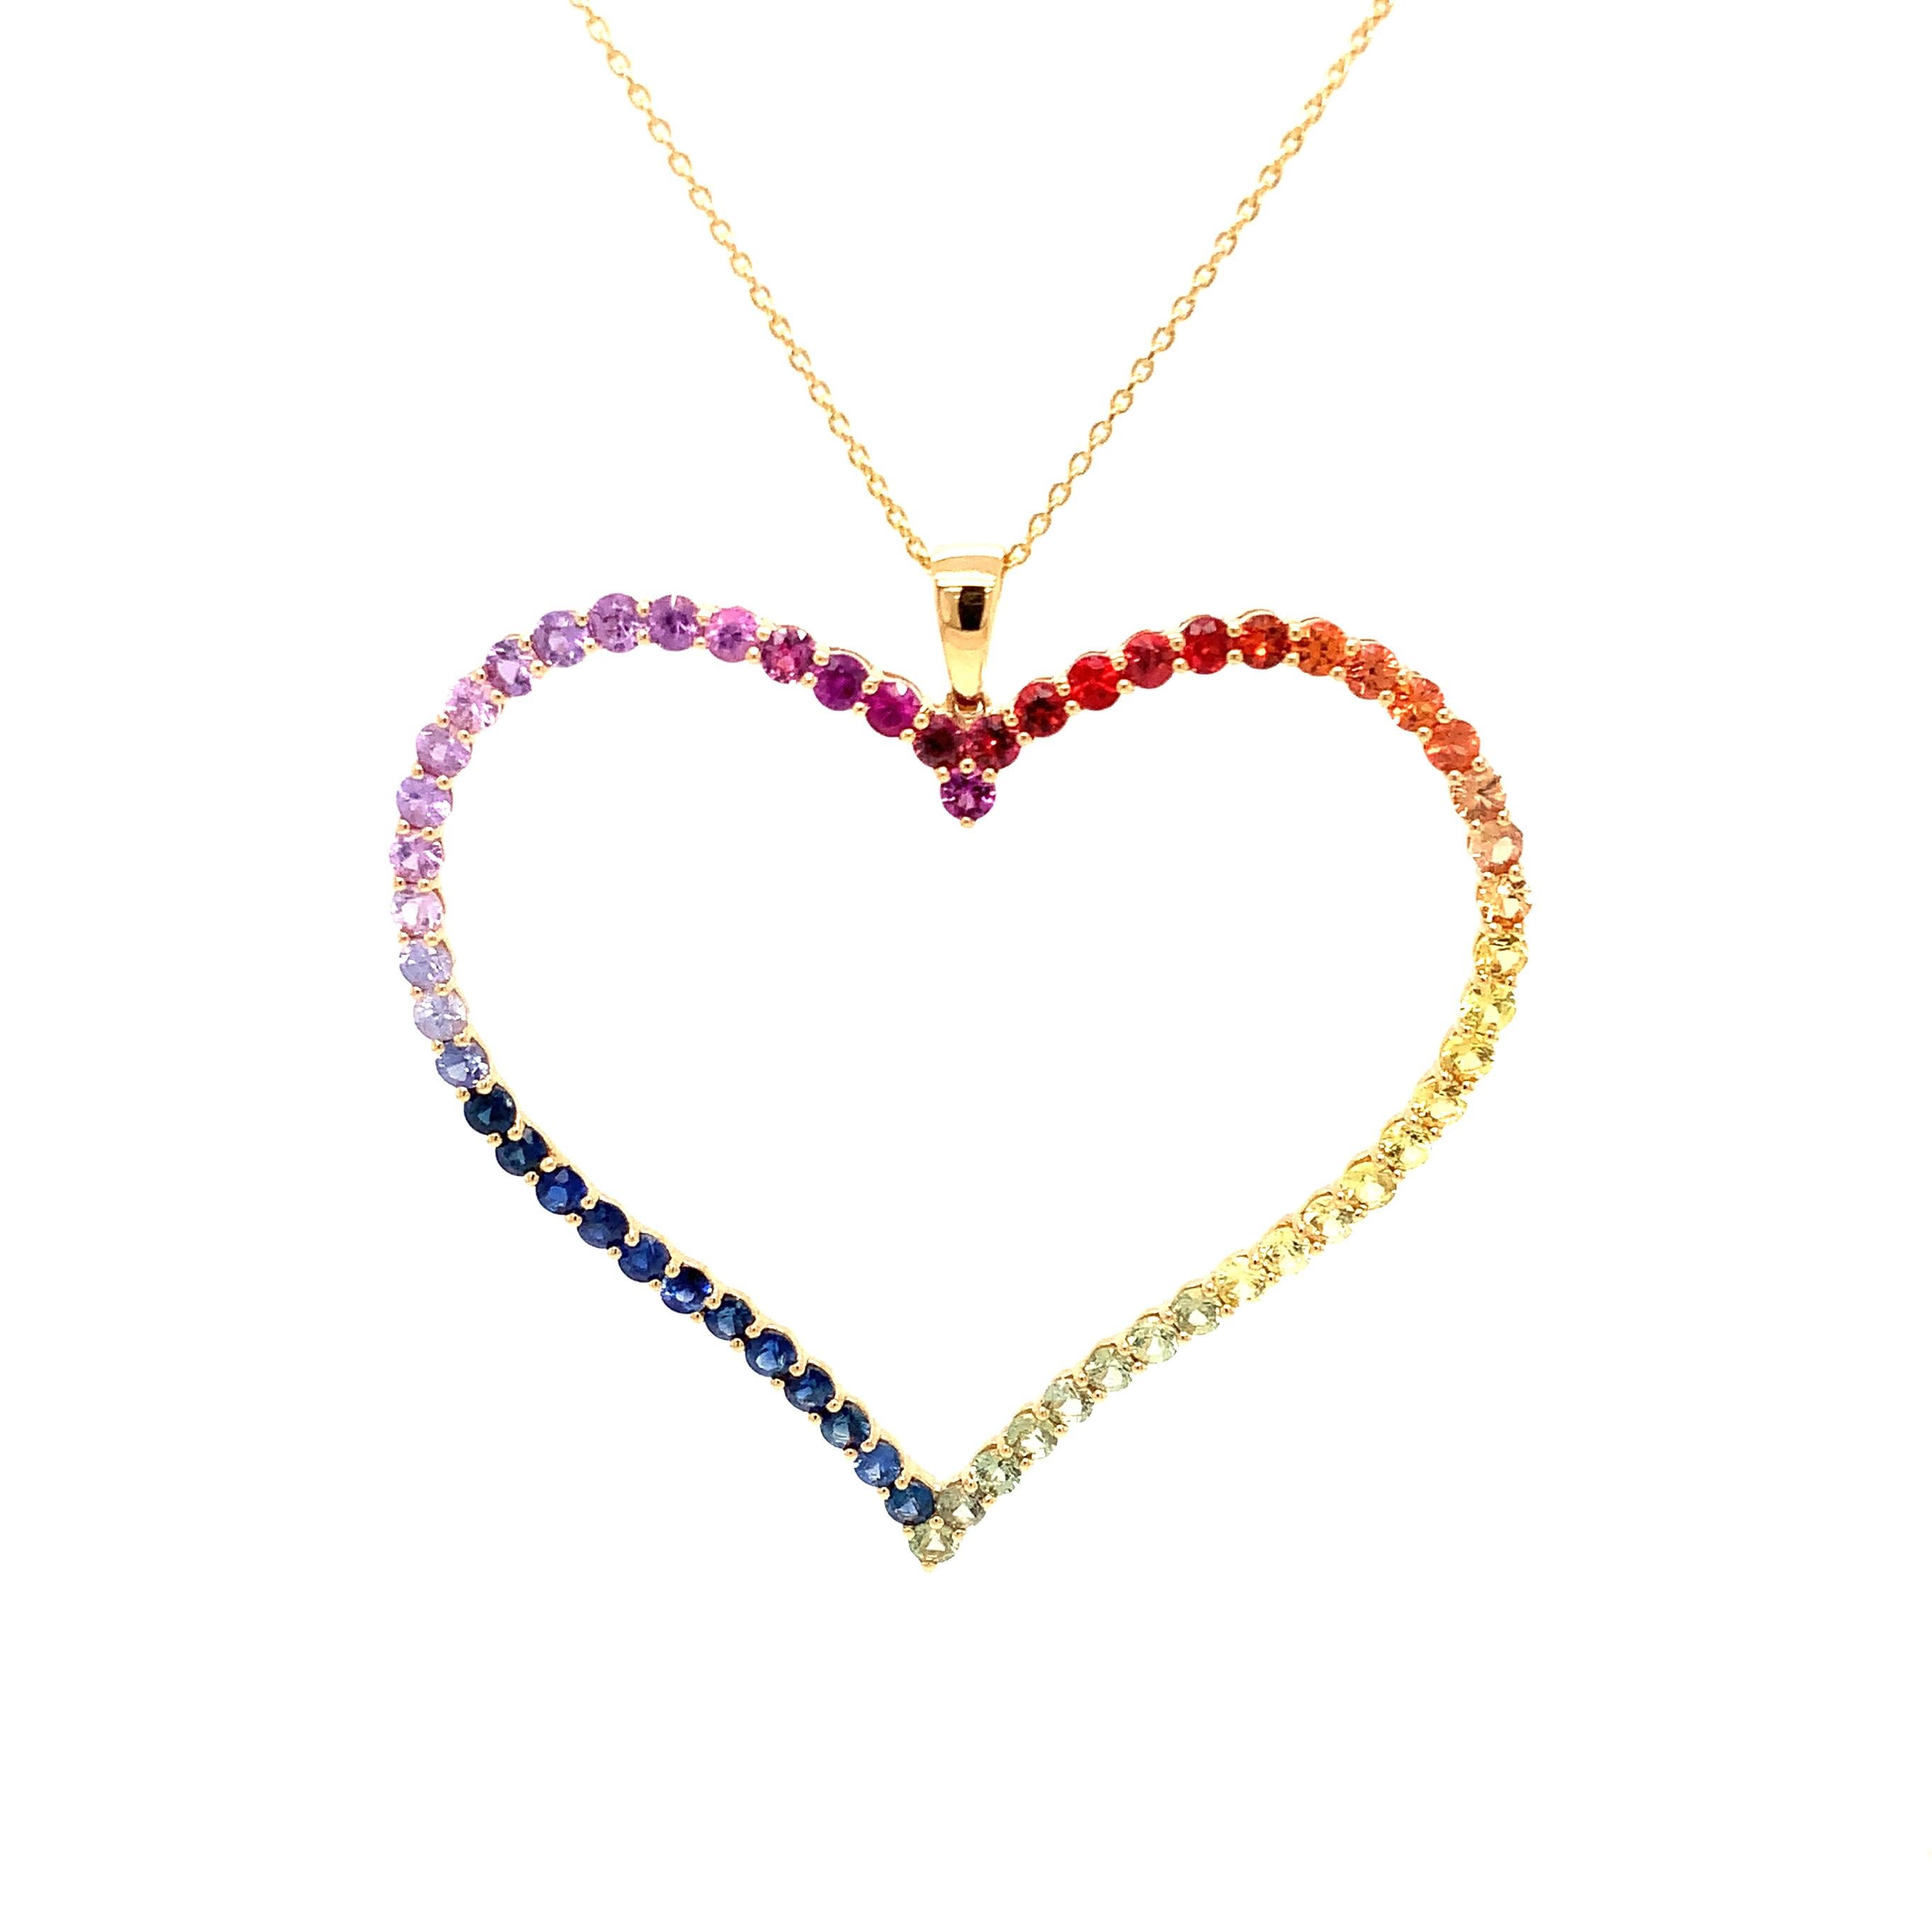 Afarin Collection Multi-Color Rainbow Sapphire Heart Shaped 18K Yellow Gold Pendant
60 Round Brilliant Cut Spectrom Sapphires equal 4.05 cts t.w.
This Beautiful Pendant is 48.71 x 48.71mm 
18